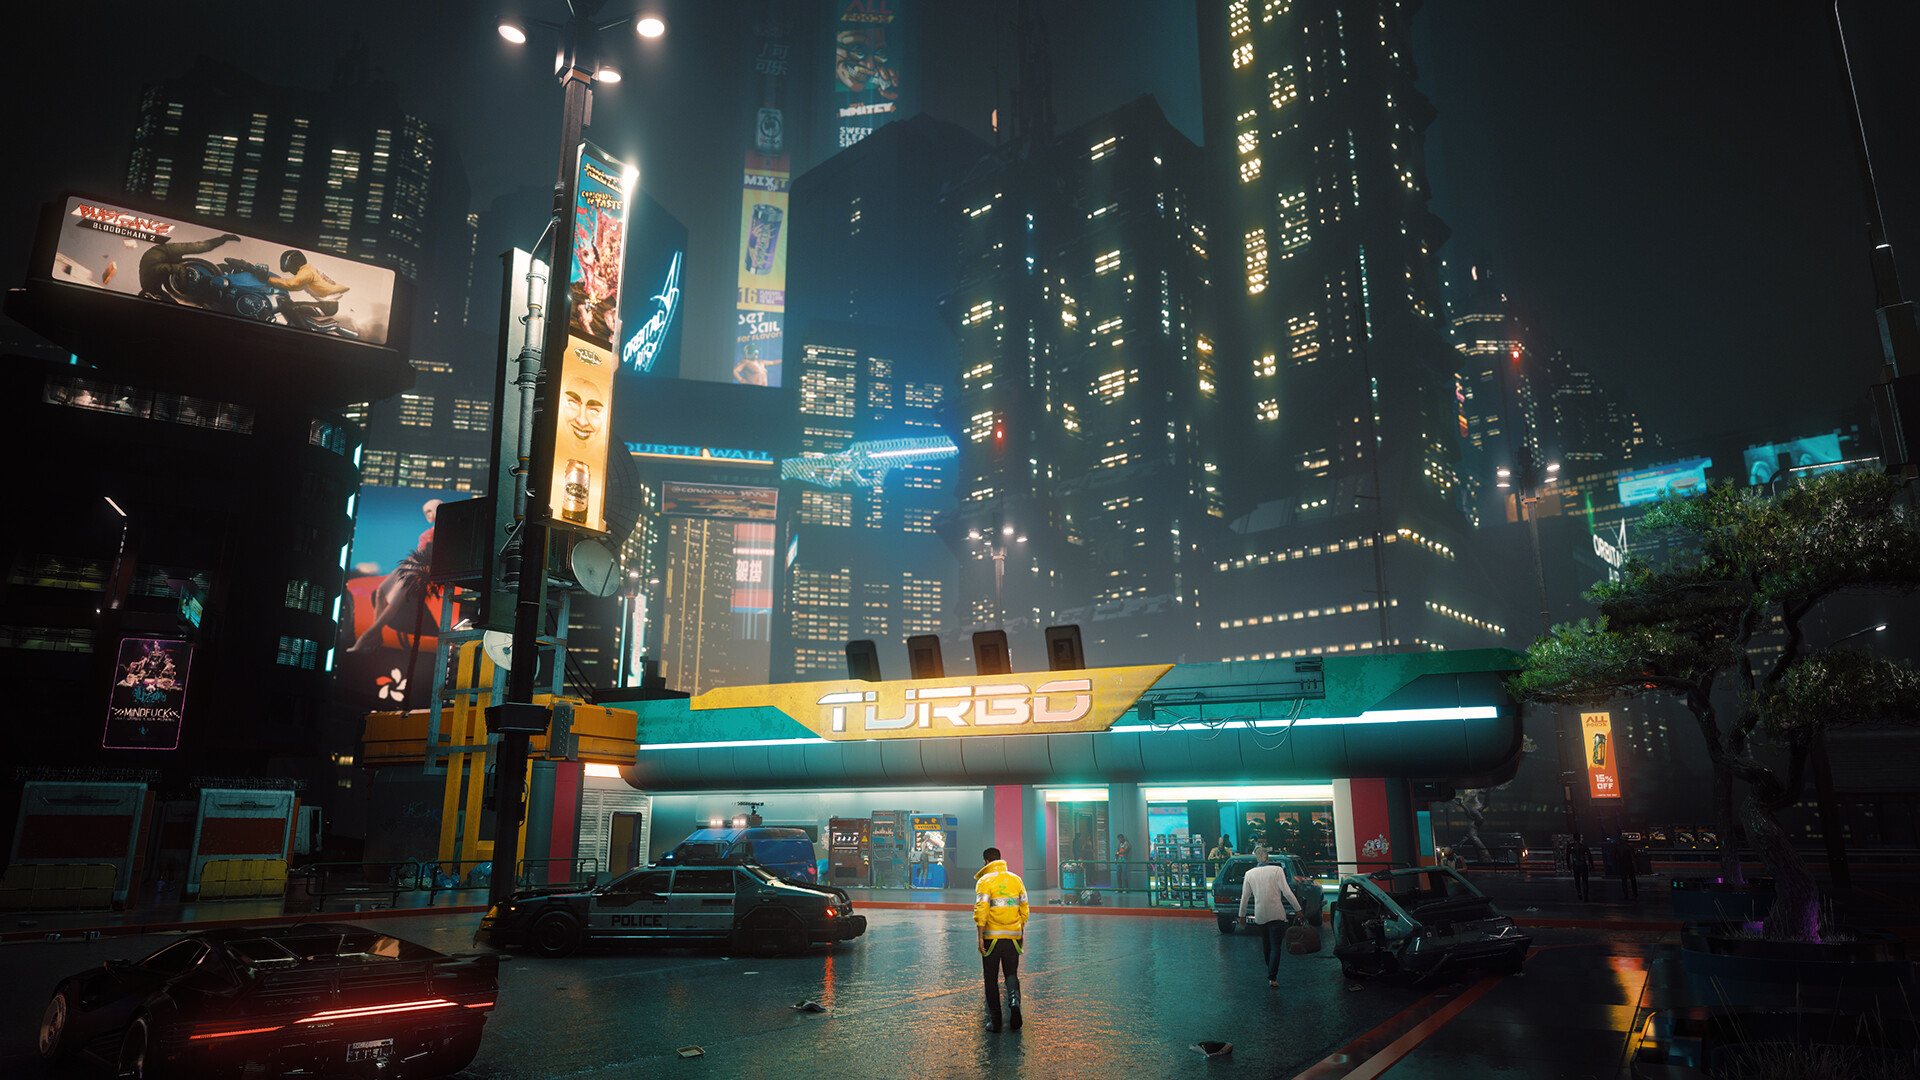 Cyberpunk 2077 Free Download for PC